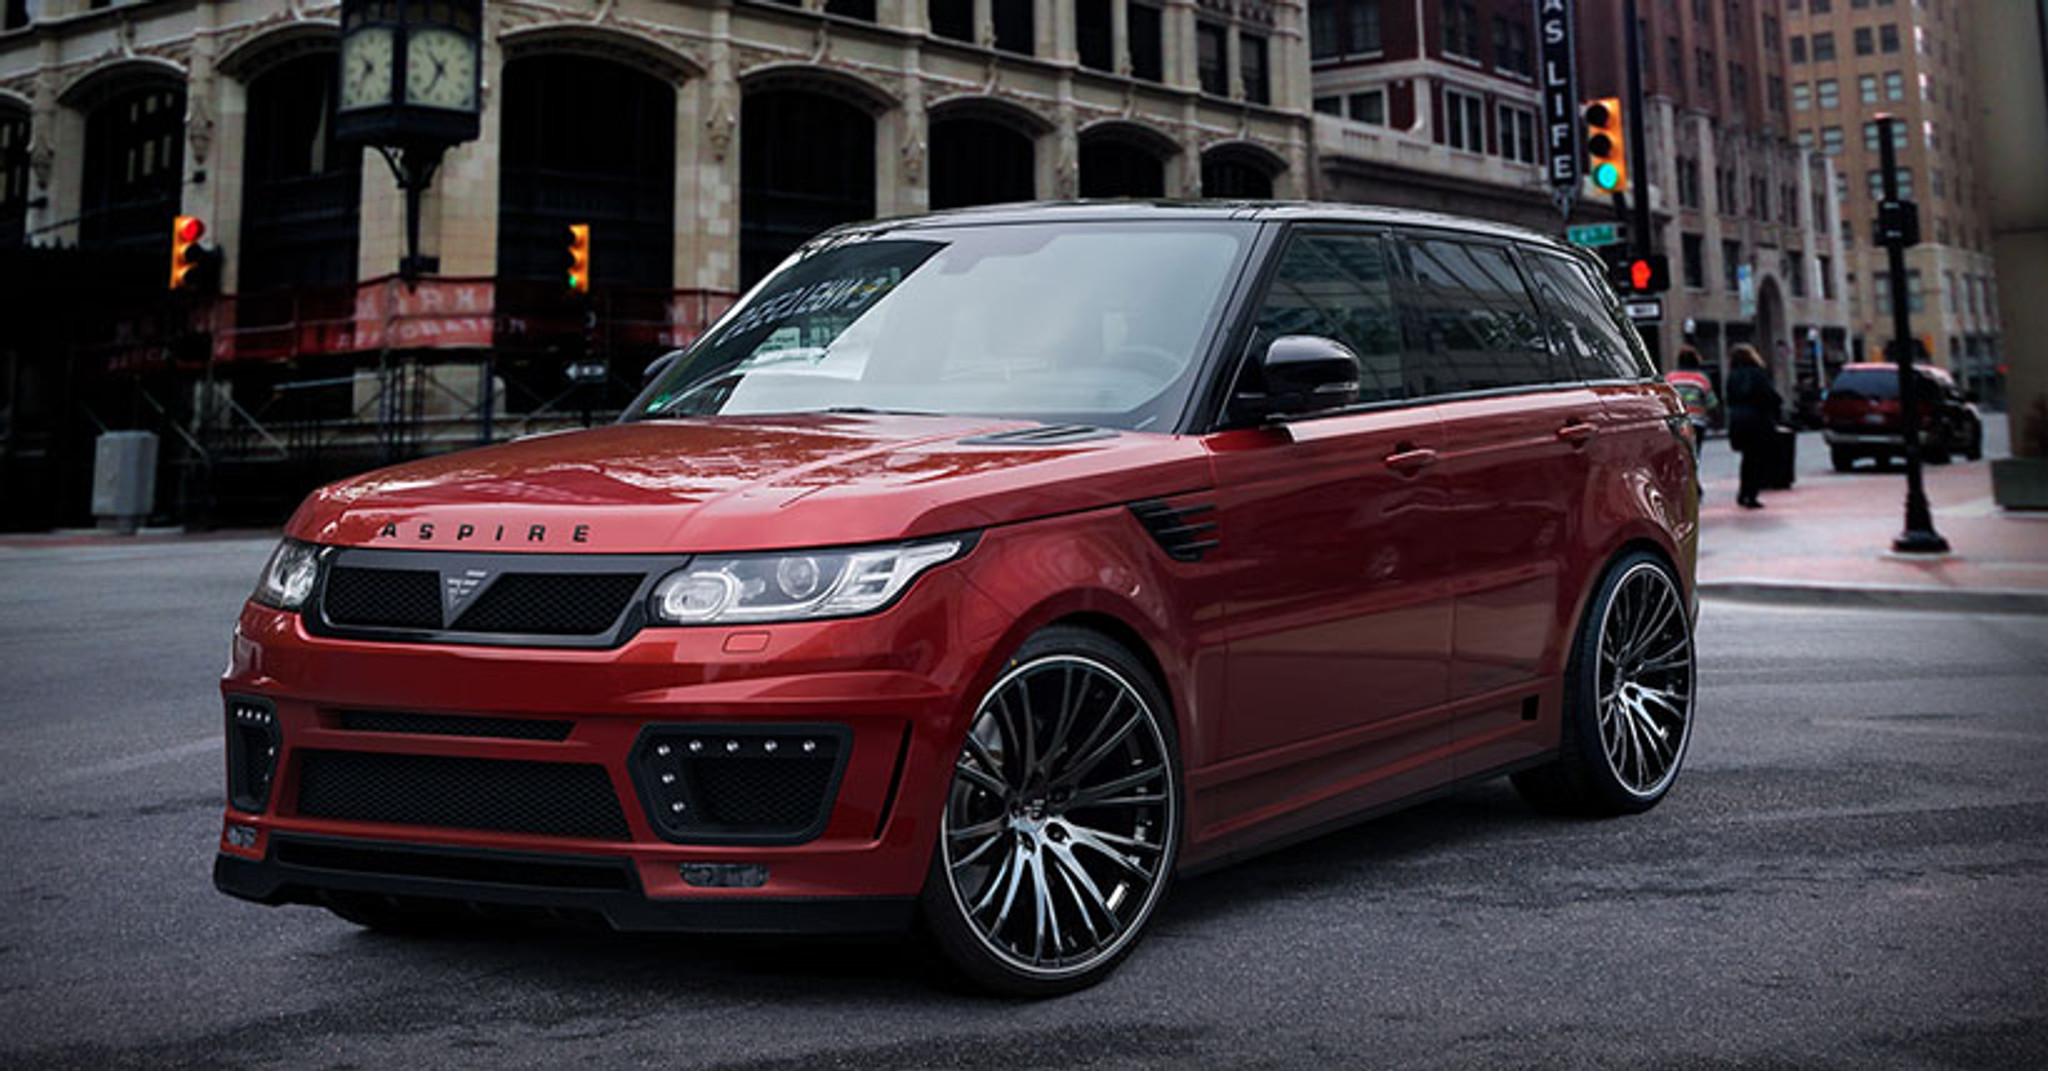 This Is Aspire Design`s Magnificent Built on Range Rover 